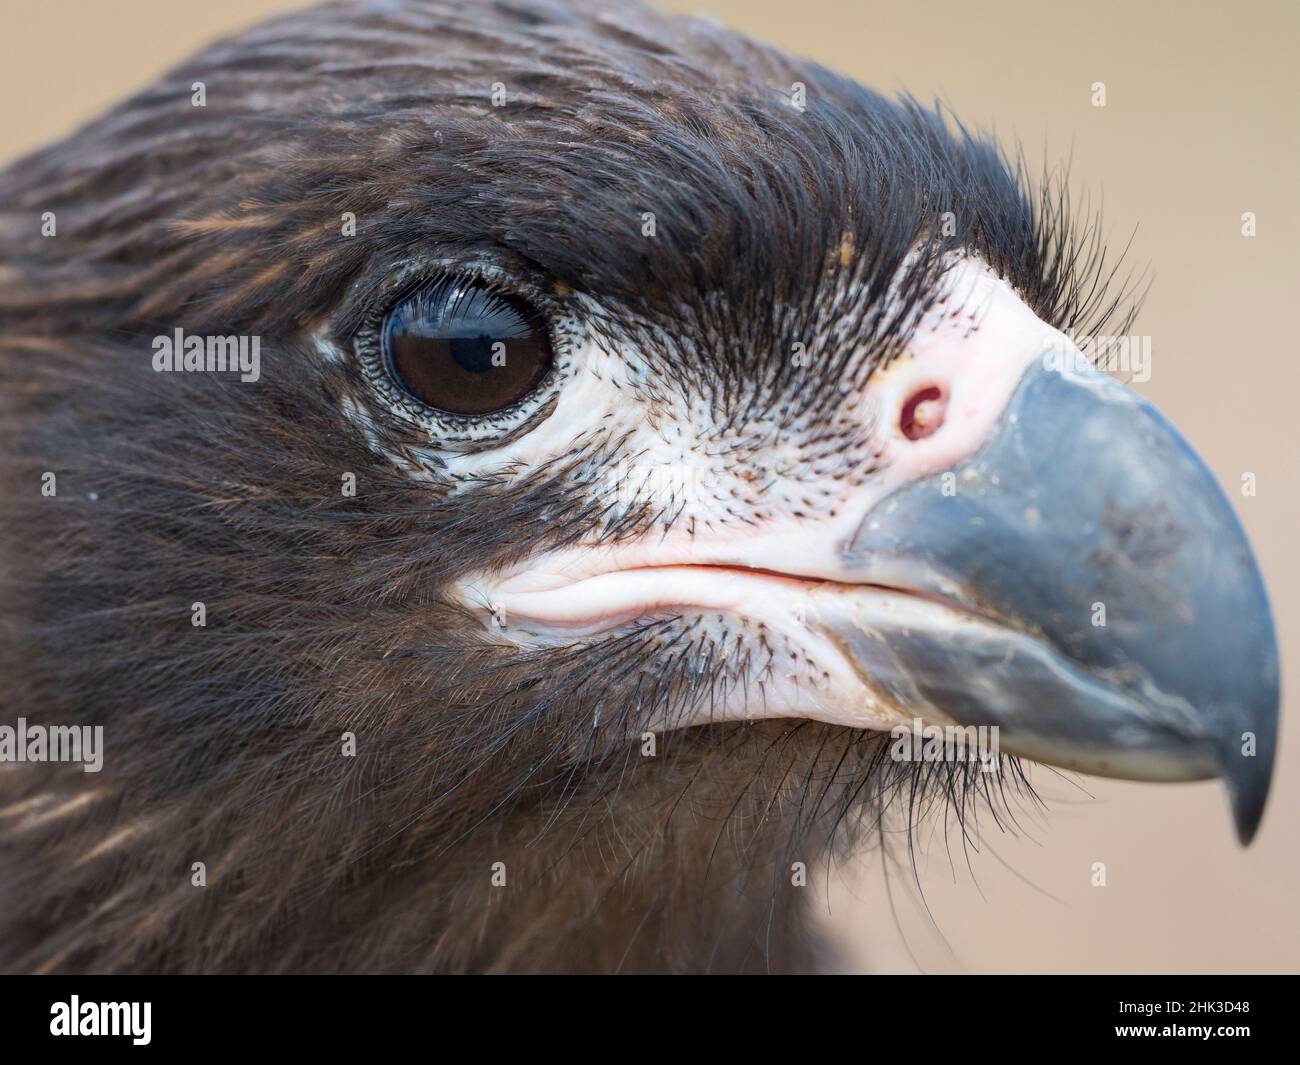 Juvenile with typical pale skin in face. Striated Caracara or Johnny Rook, protected, endemic to the Falkland Islands. Stock Photo